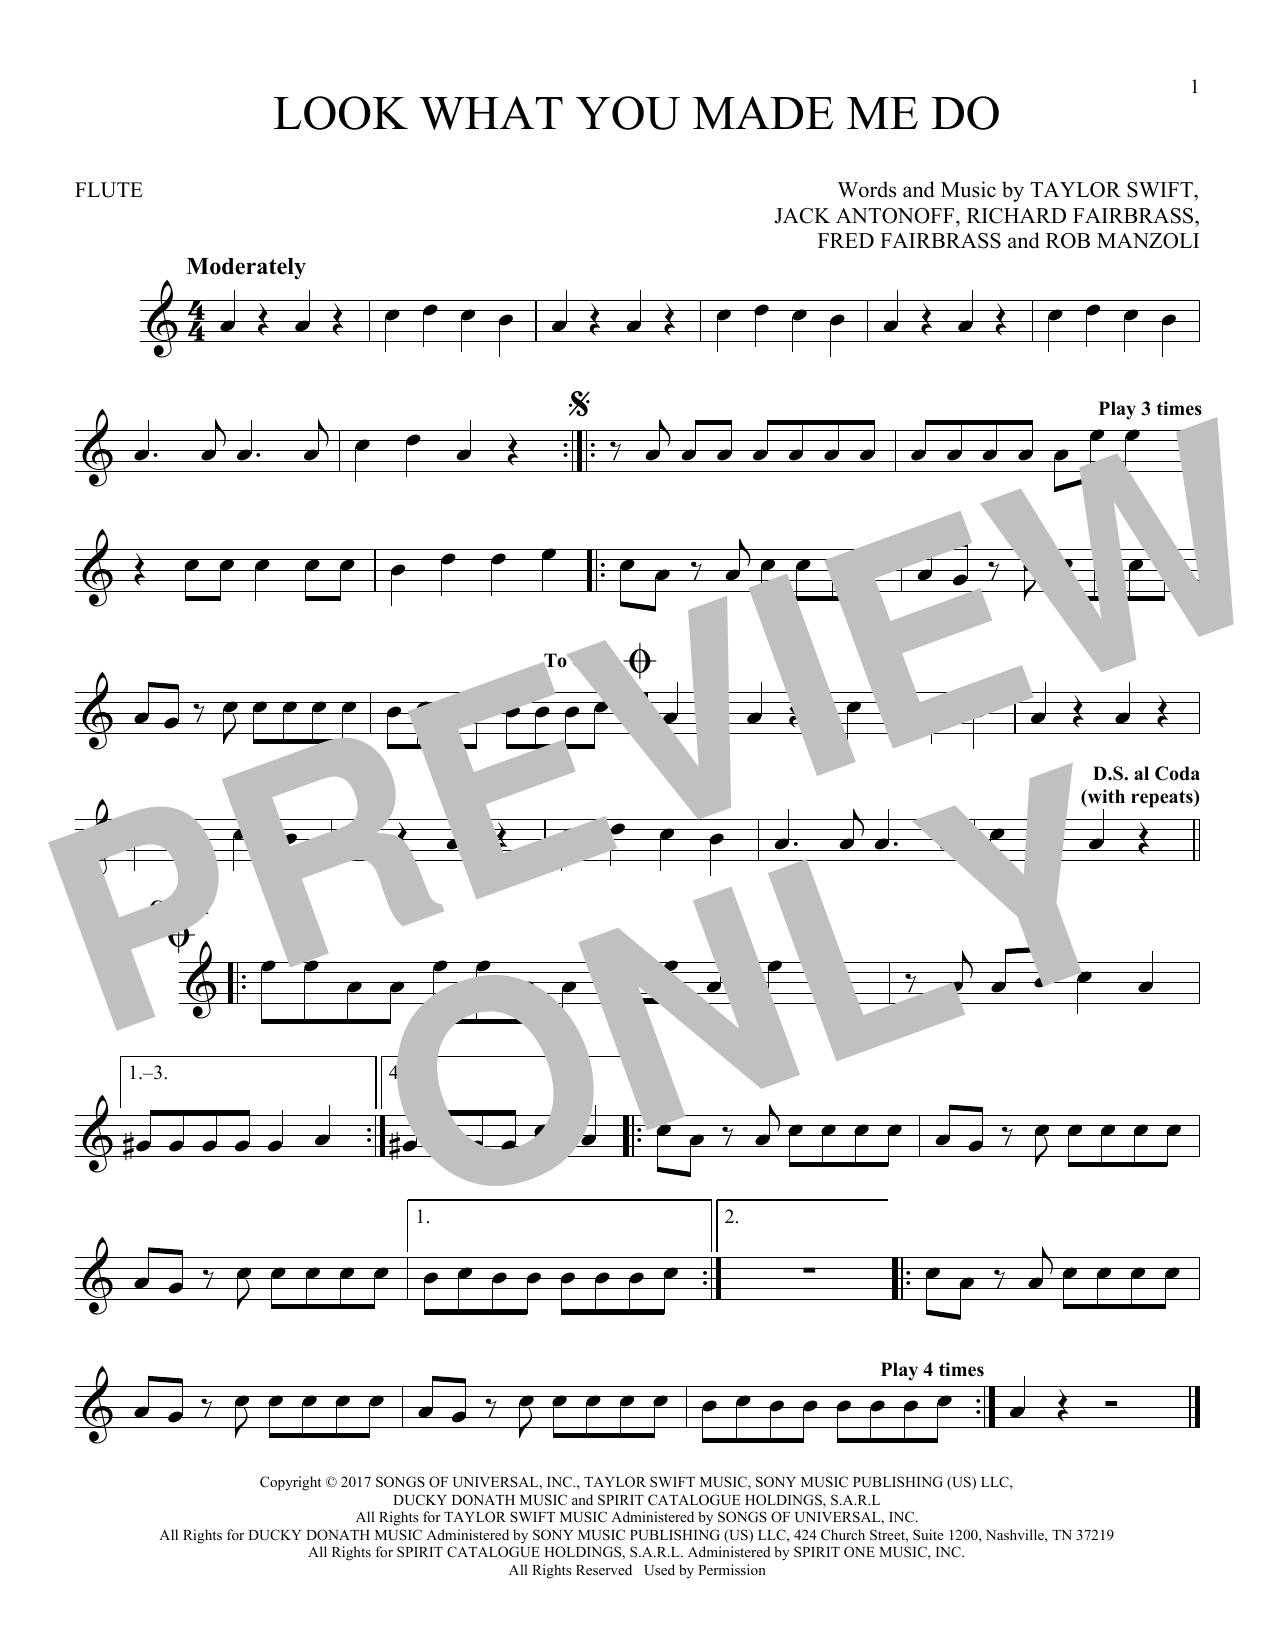 Download Taylor Swift Look What You Made Me Do Sheet Music